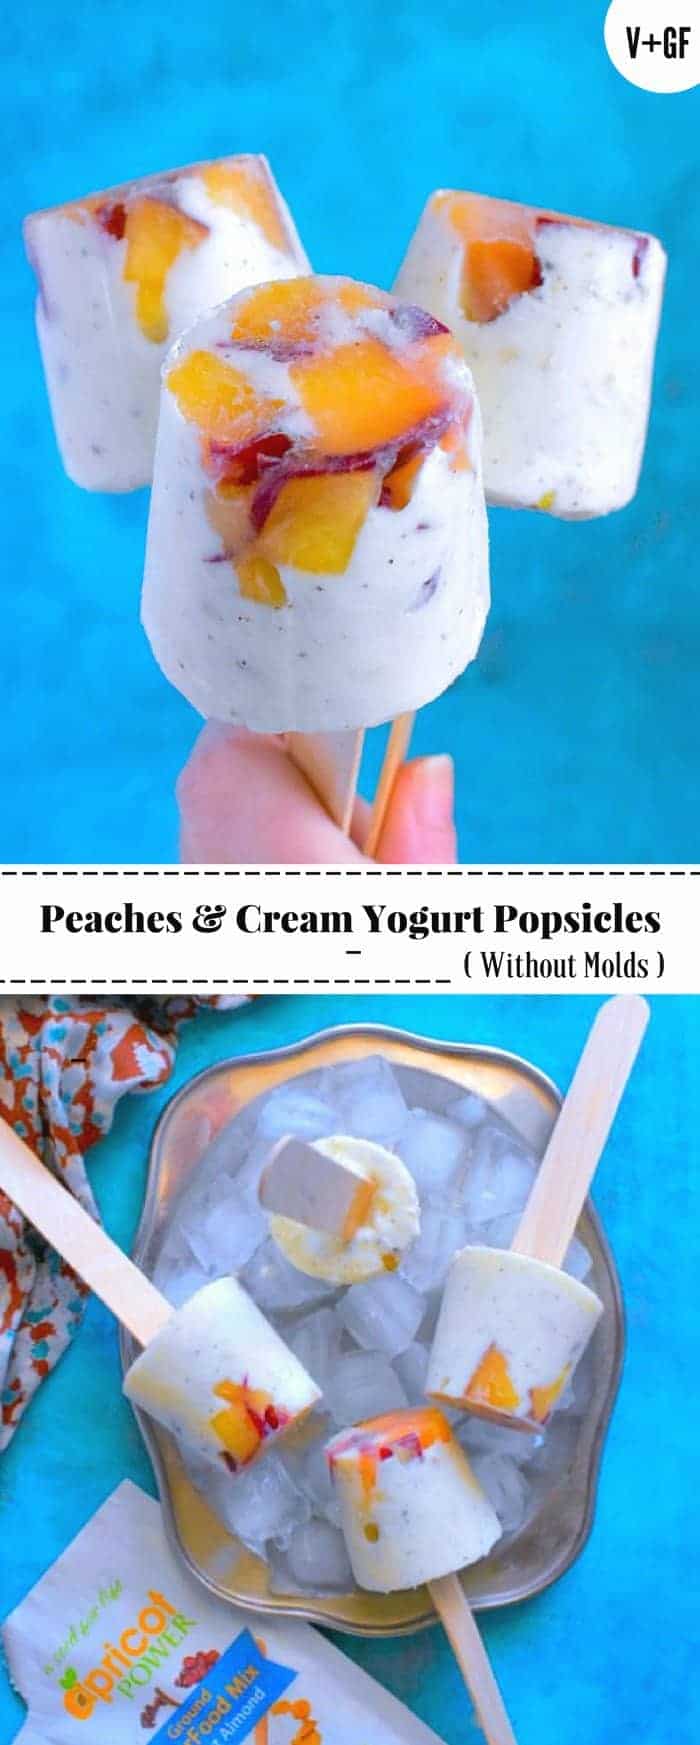 Peaches and Cream Yogurt Popsicles (Without Molds): #popsicles #peach #yogurt #nomold